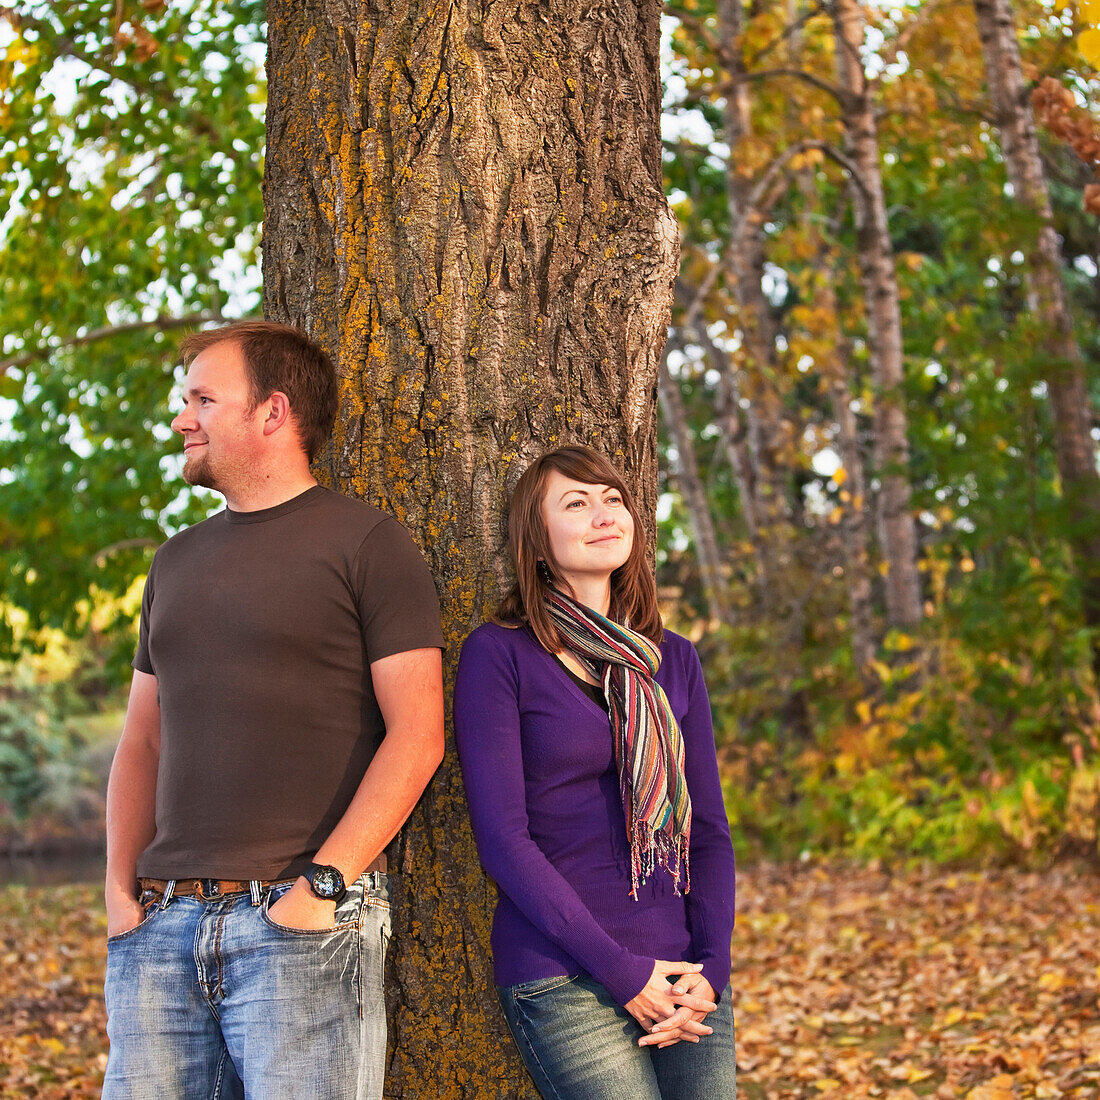 'Young married couple leaning against a tree in a park in autumn;Edmonton alberta canada'